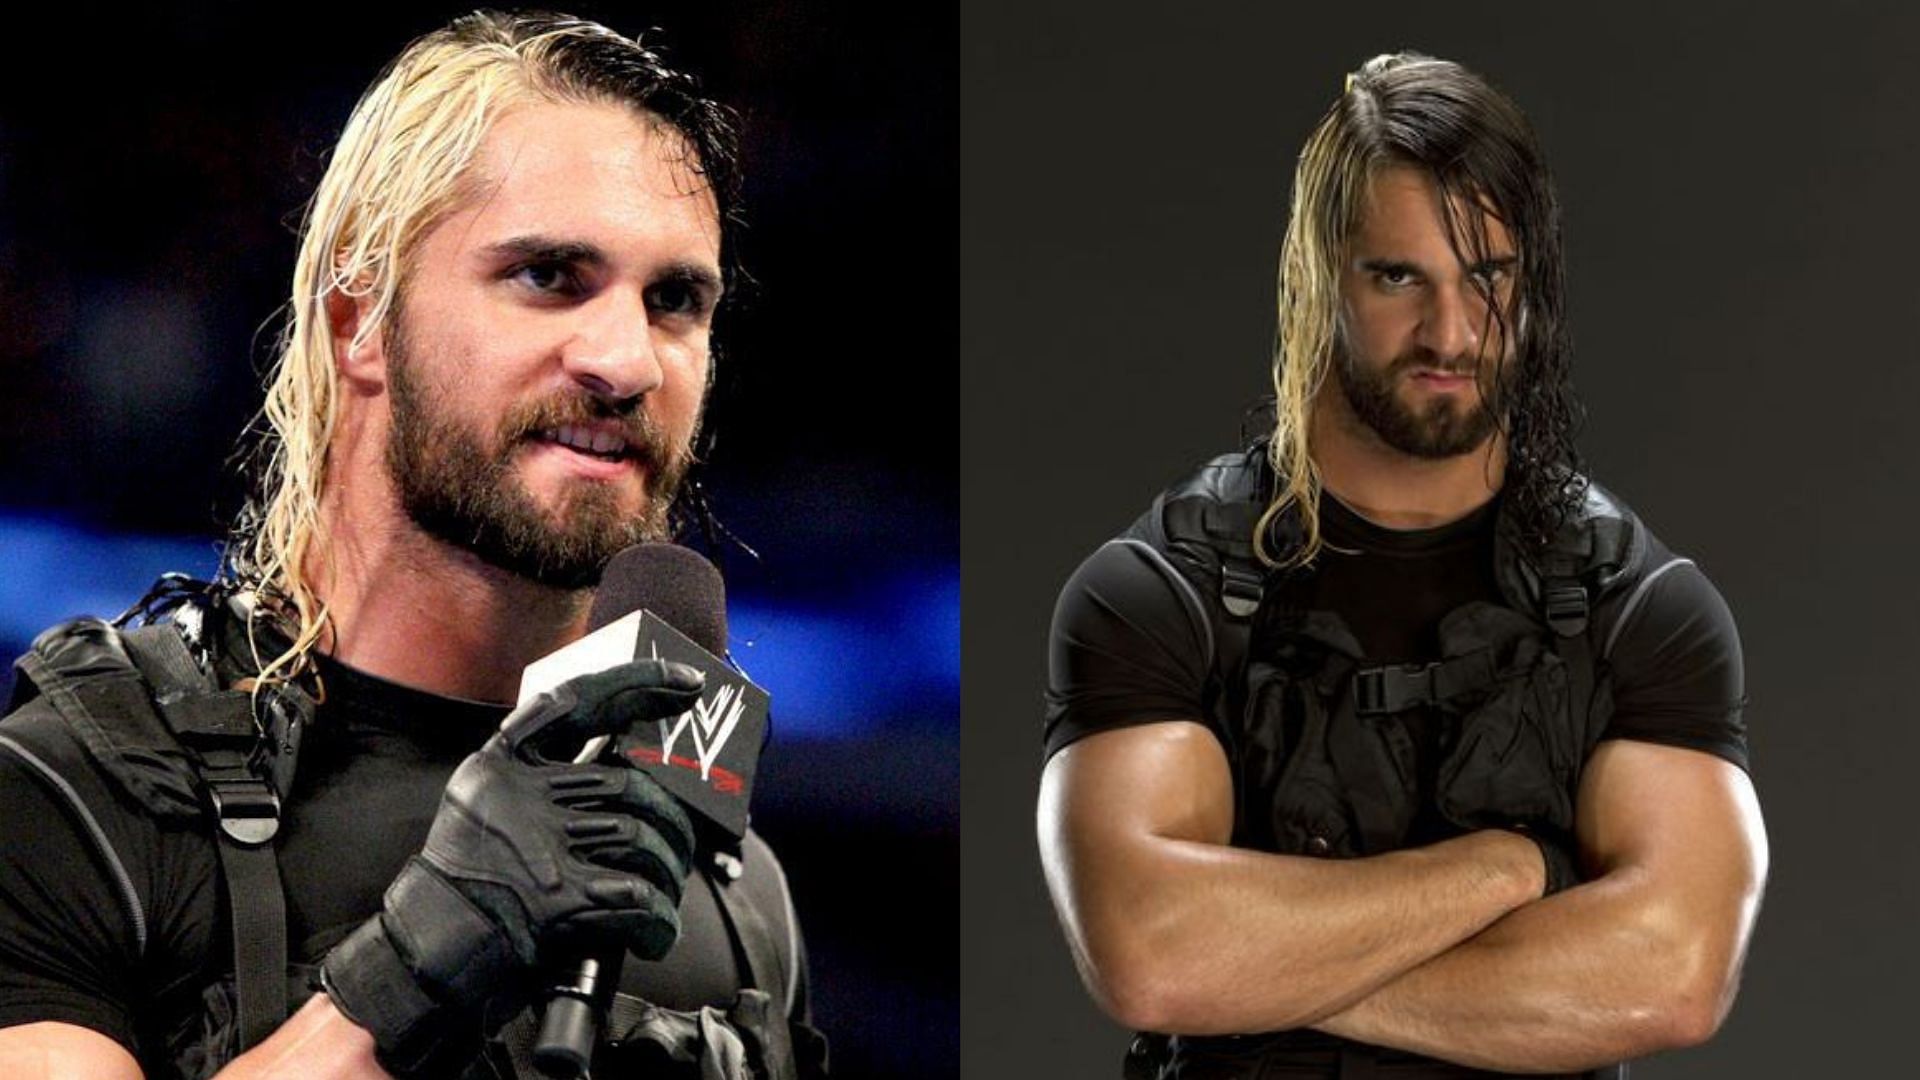 Seth Rollins' new look Why did the WWE star initially dye his hair blond?